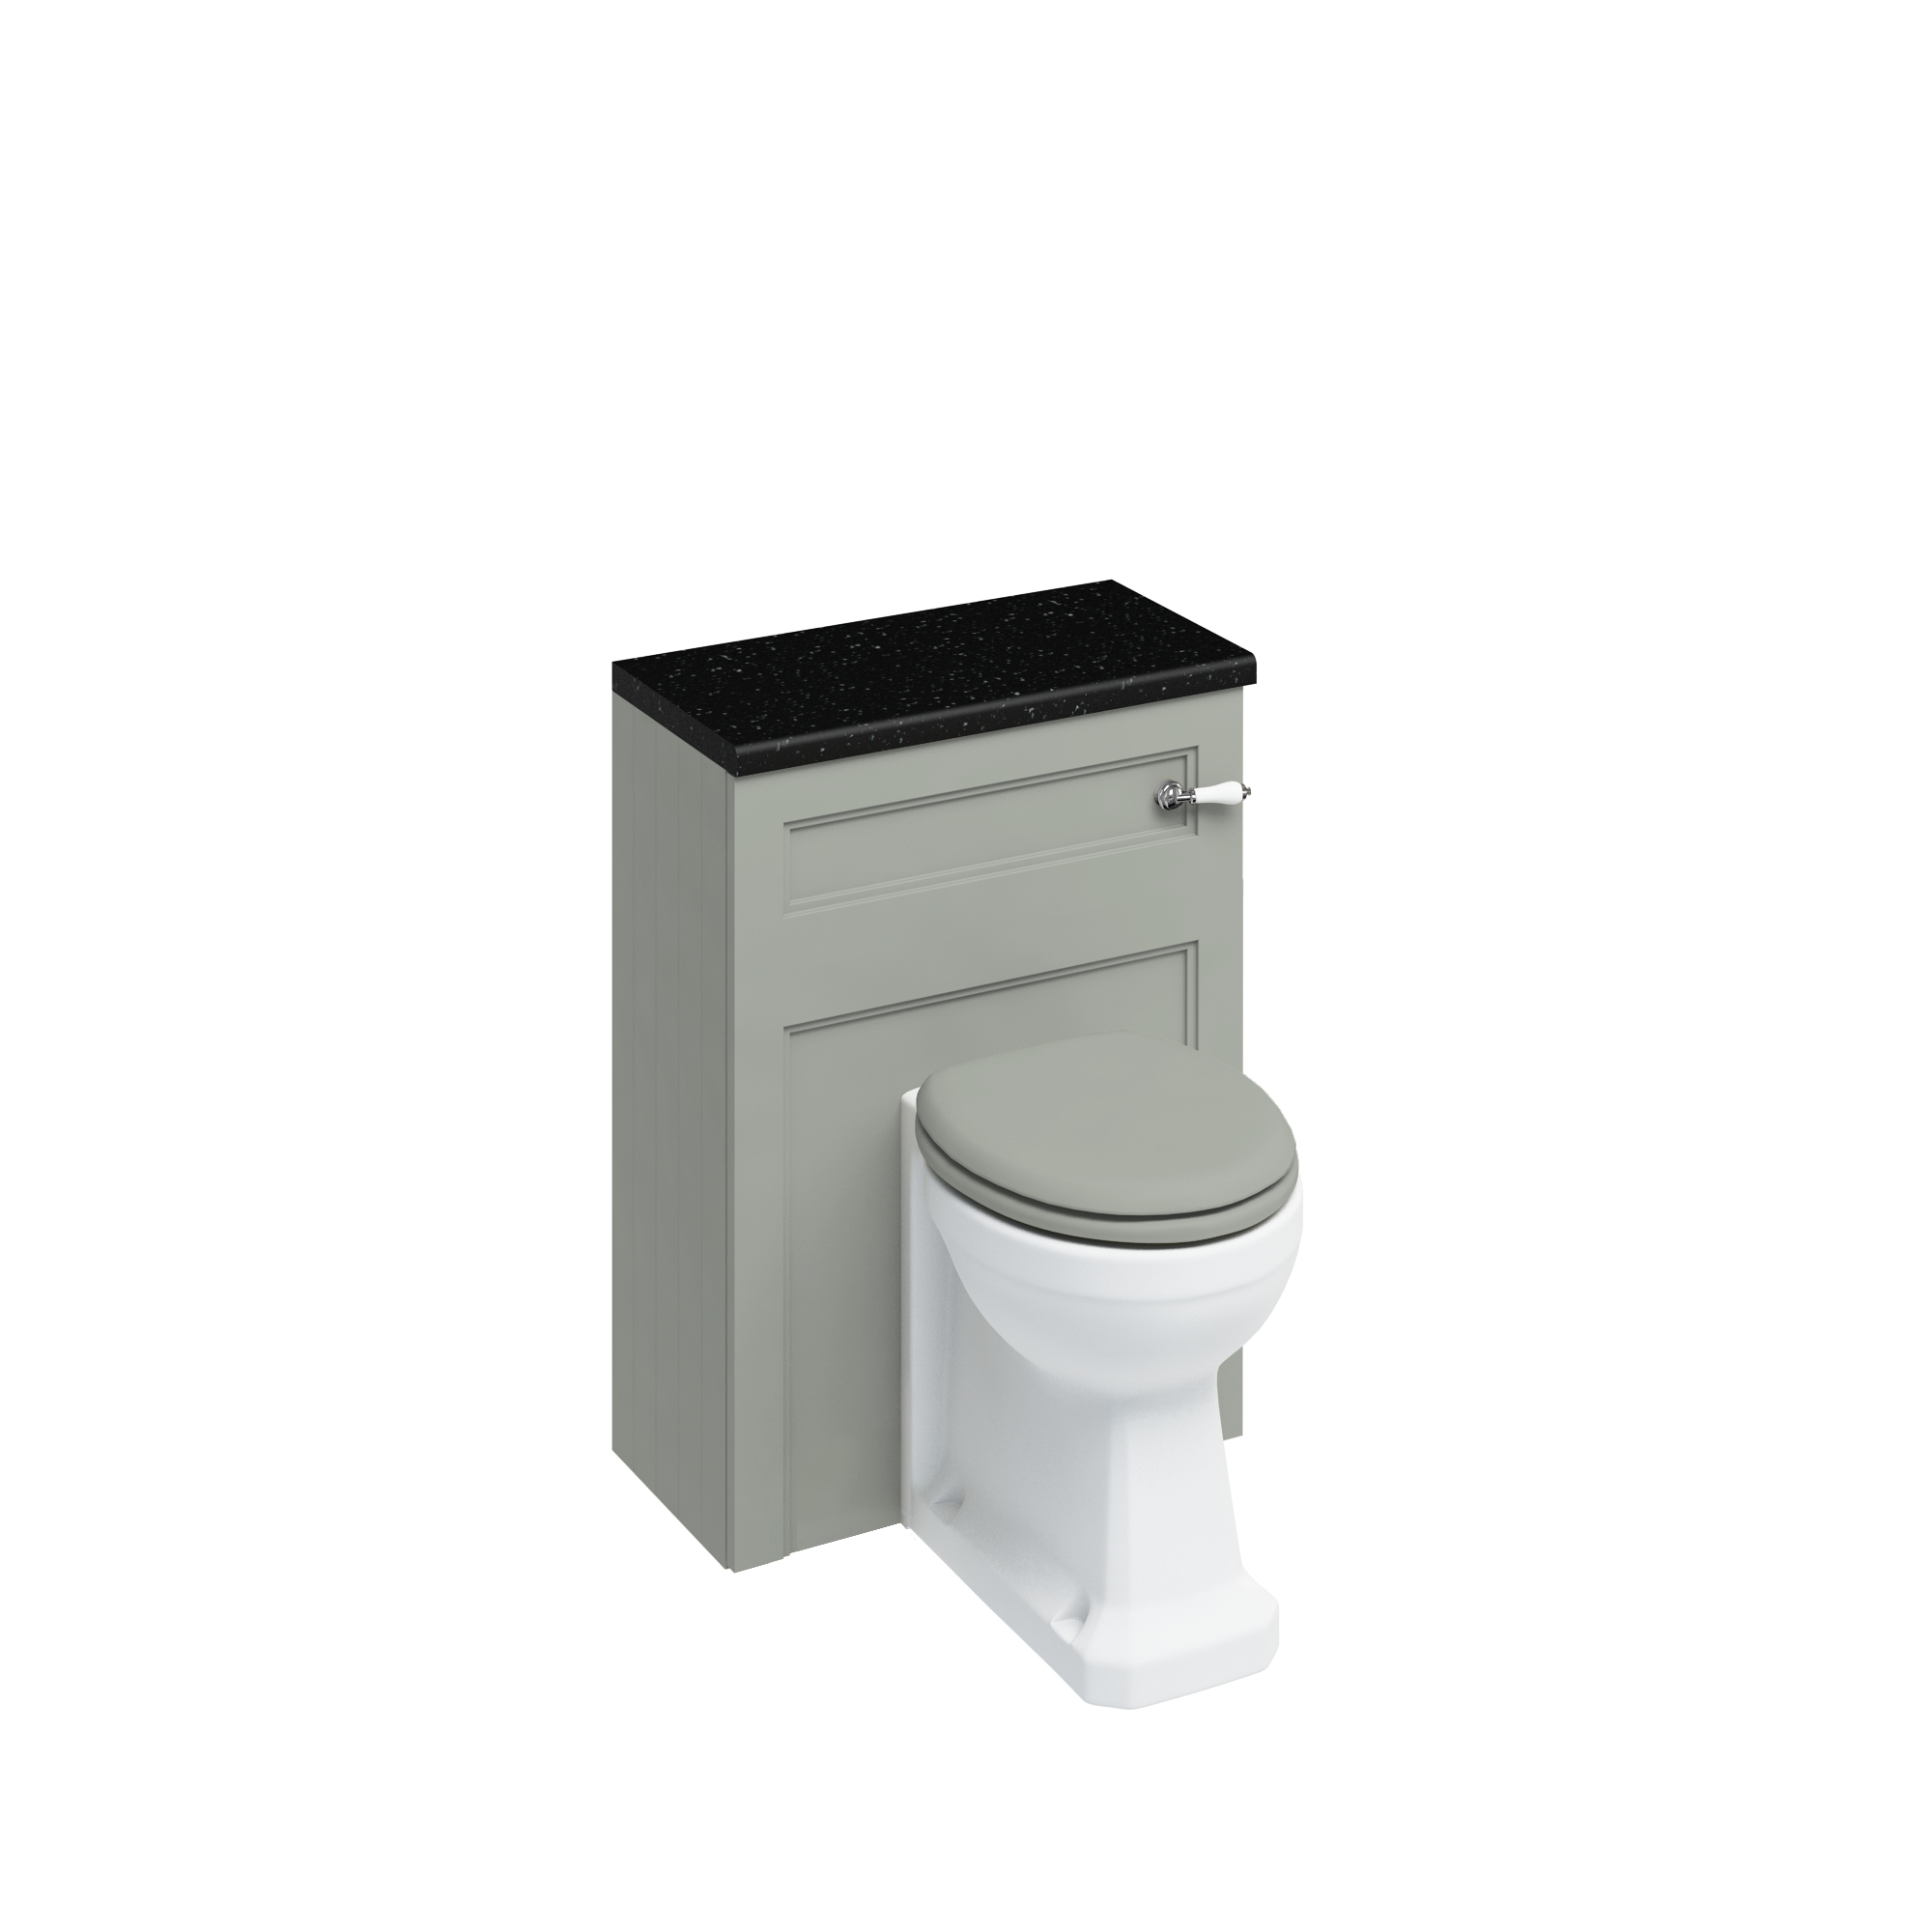 60cm Back to Wall WC Unit with Lever Flush cistern fittings